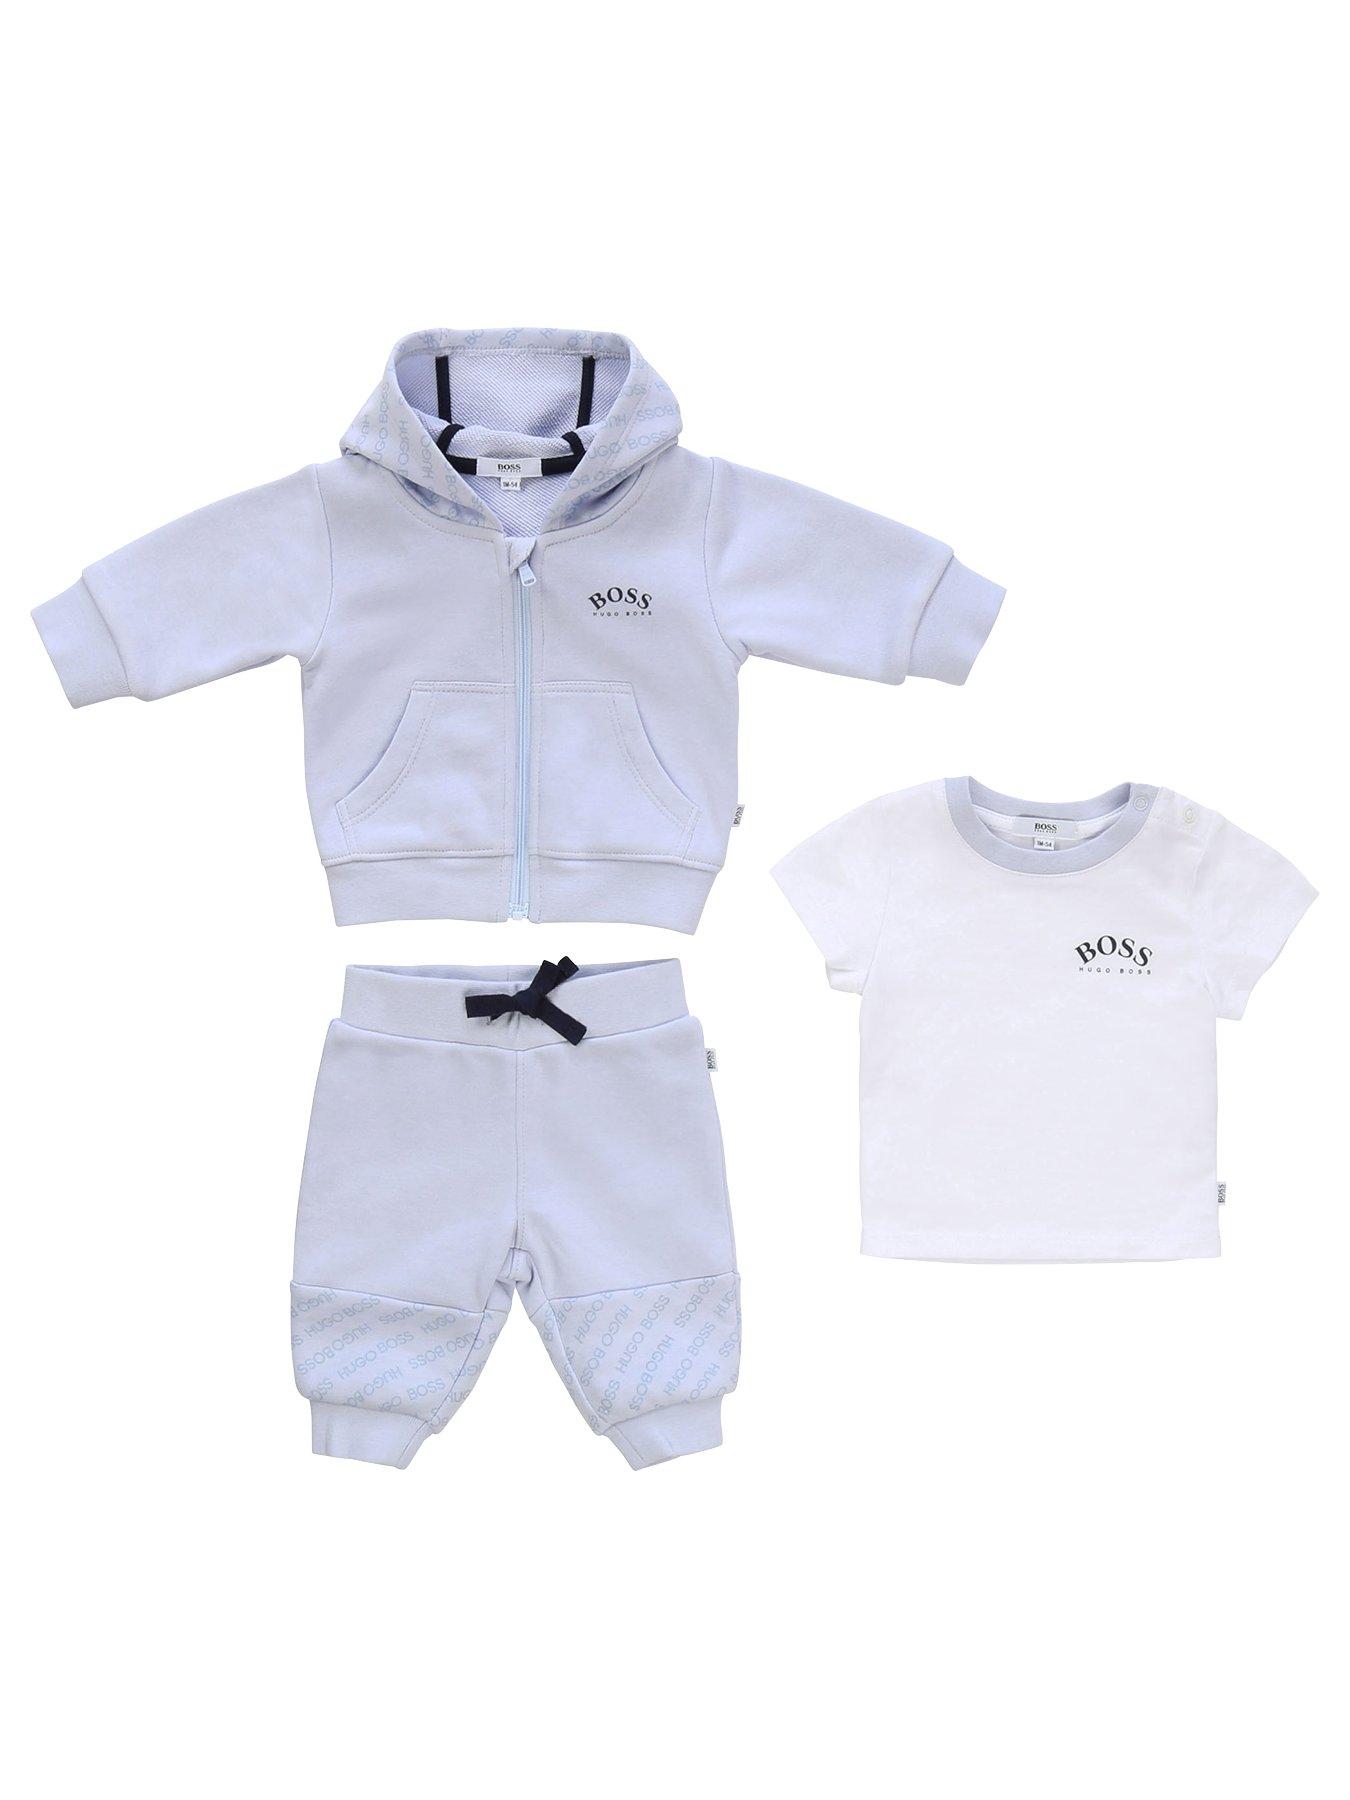 baby boss tracksuit